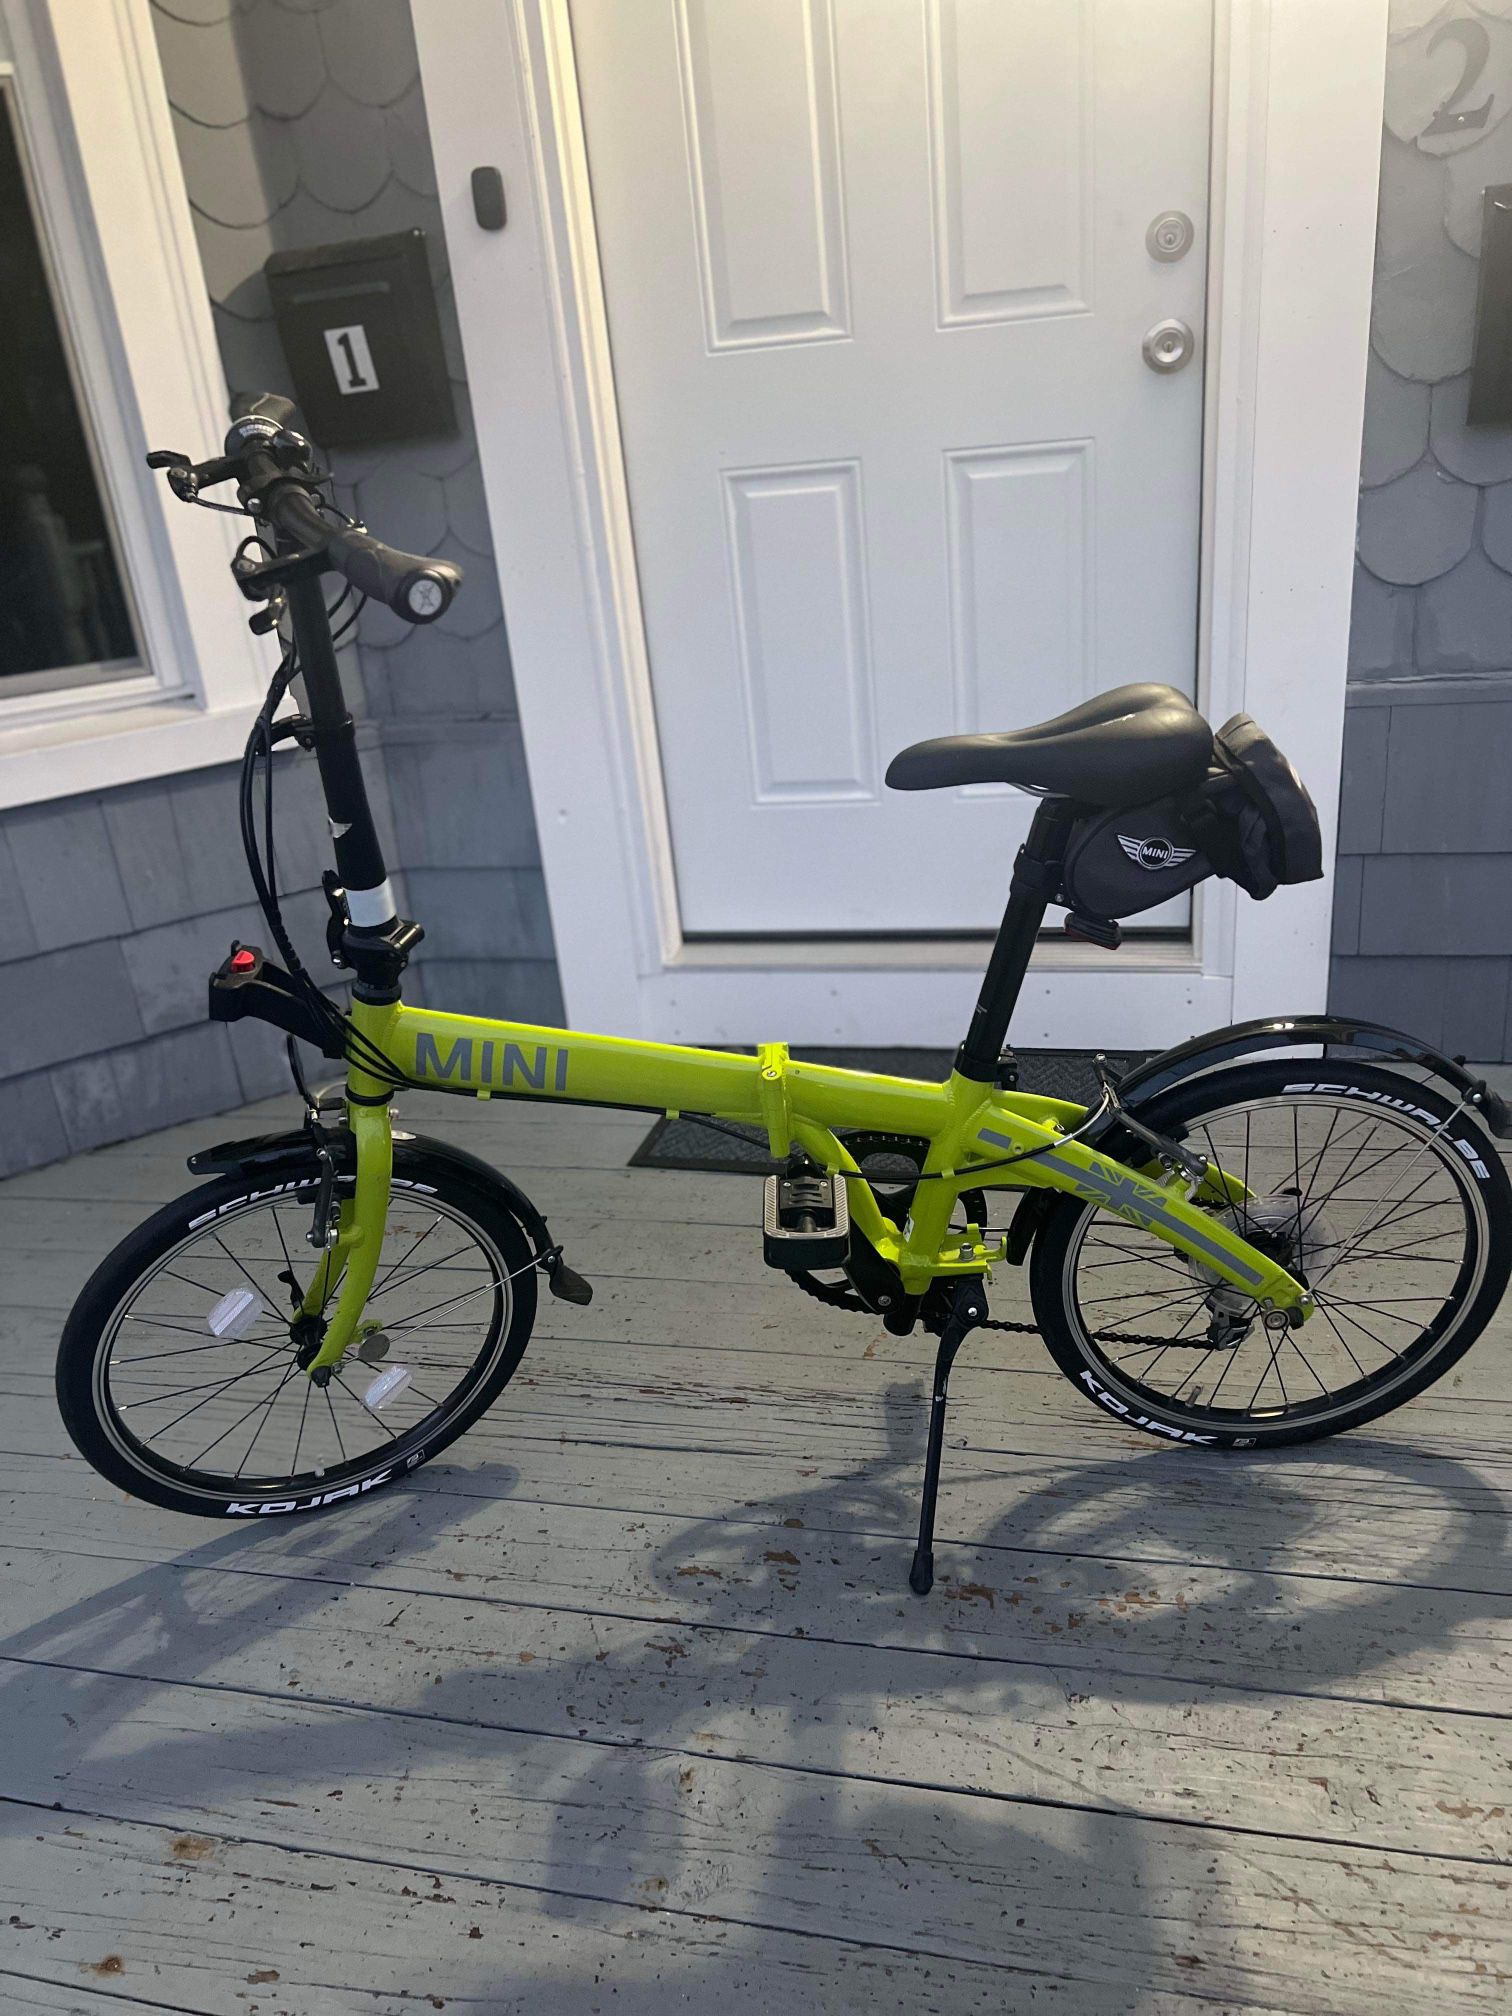 MINI COOPER City Cruiser Folding Bicycle -Lime Green 8-Speed